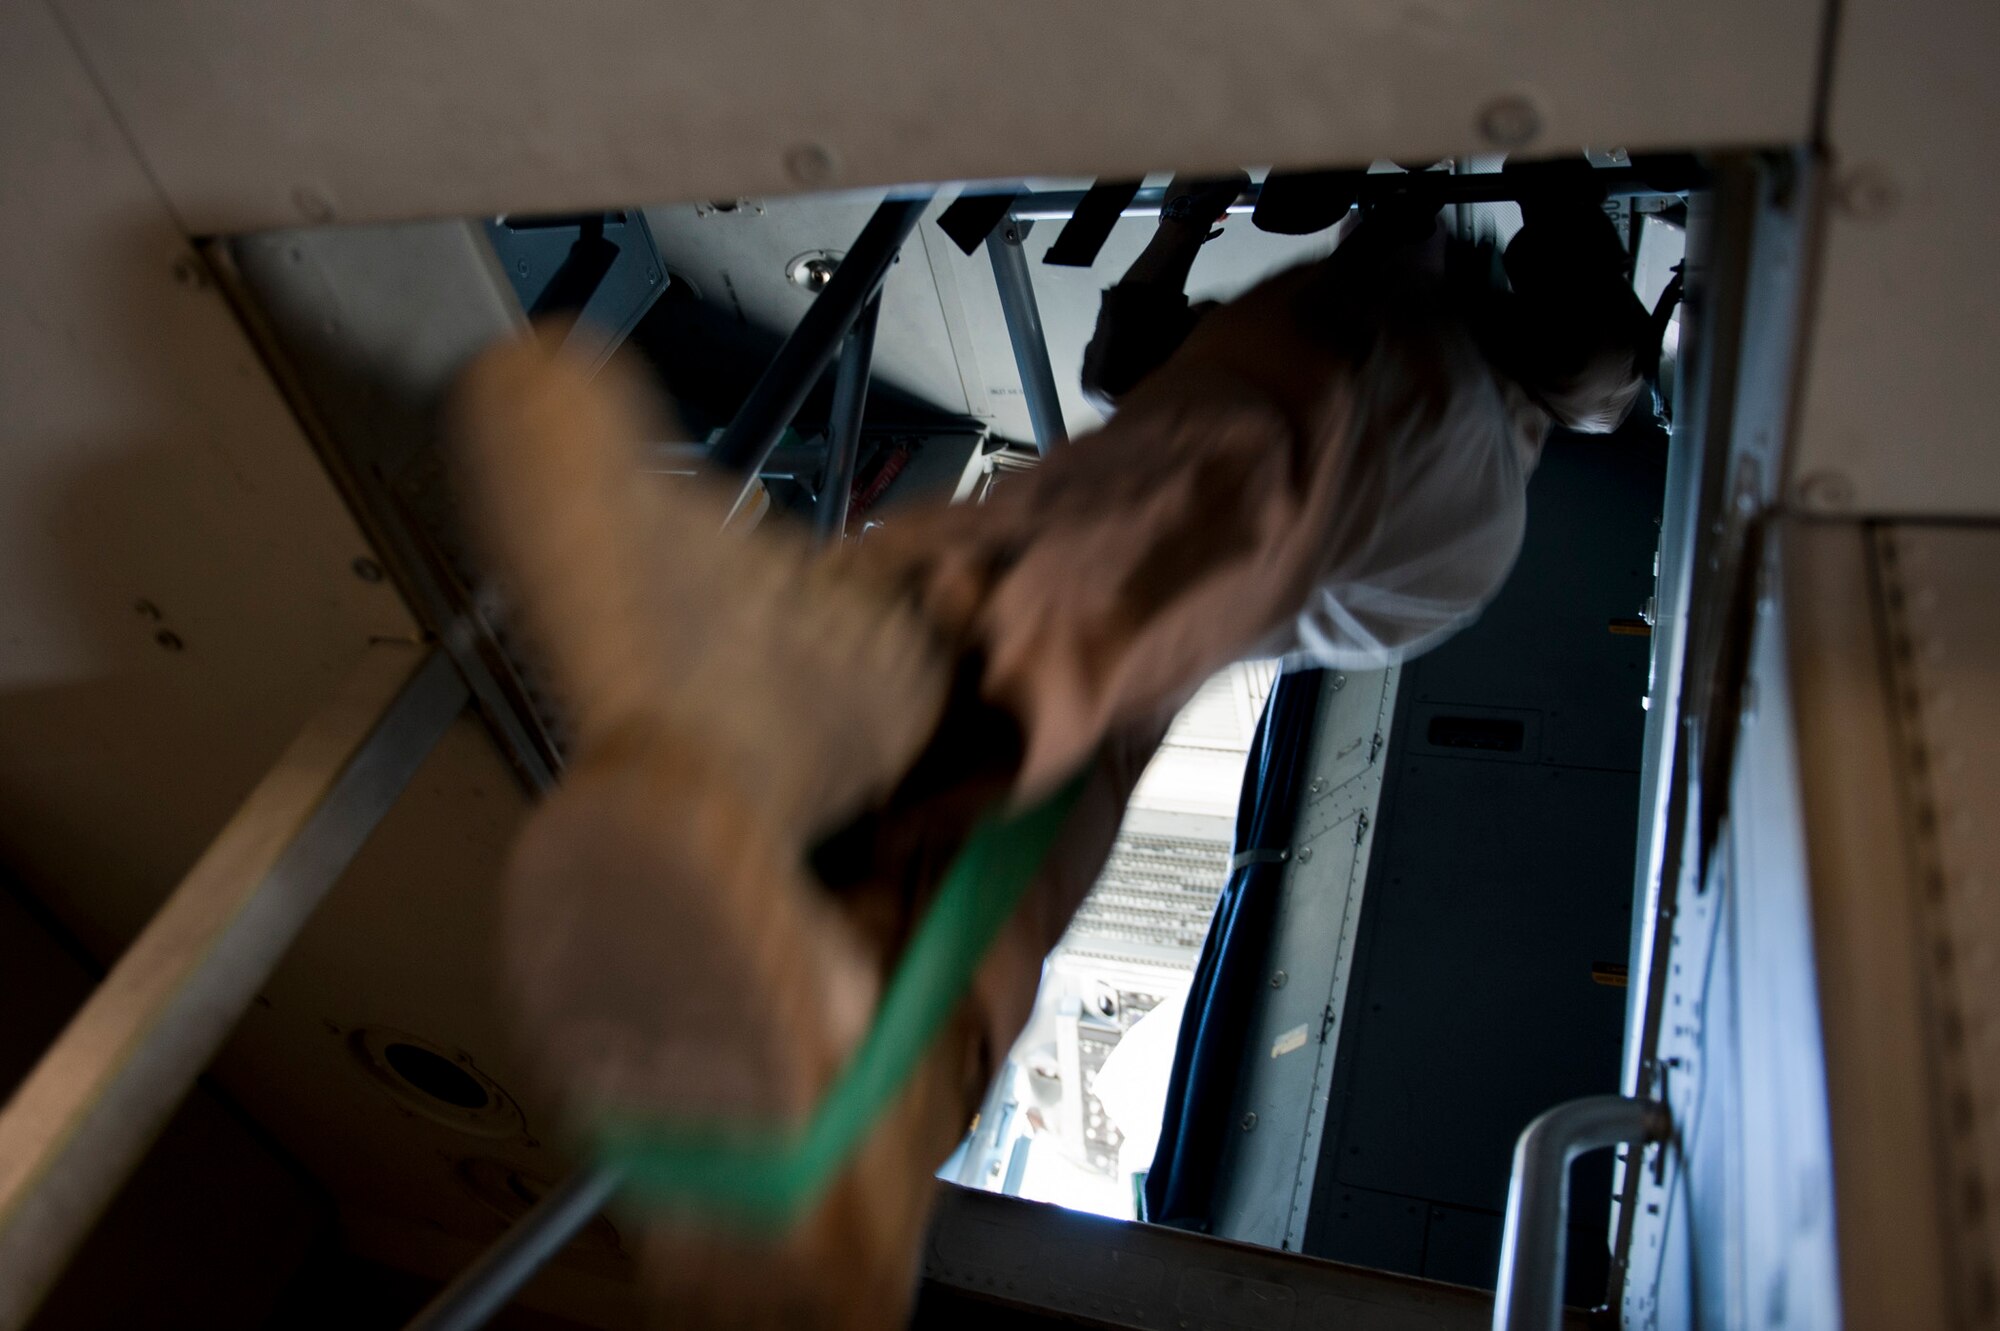 Staff Sgt. Melissa Butterfield, an 817th Expeditionary Airlift Squadron loadmaster, does pull-ups with the help of a rubber band onboard a C-17 Globemaster III aircraft Aug. 18, 2011, while flying over Afghanistan. The crew transported equipment and supplies from Incirlik Air Base, Turkey, to Kandahar Air Field, Afghanistan. (U.S. Air Force photo by Tech. Sgt. Michael B. Keller/Released)